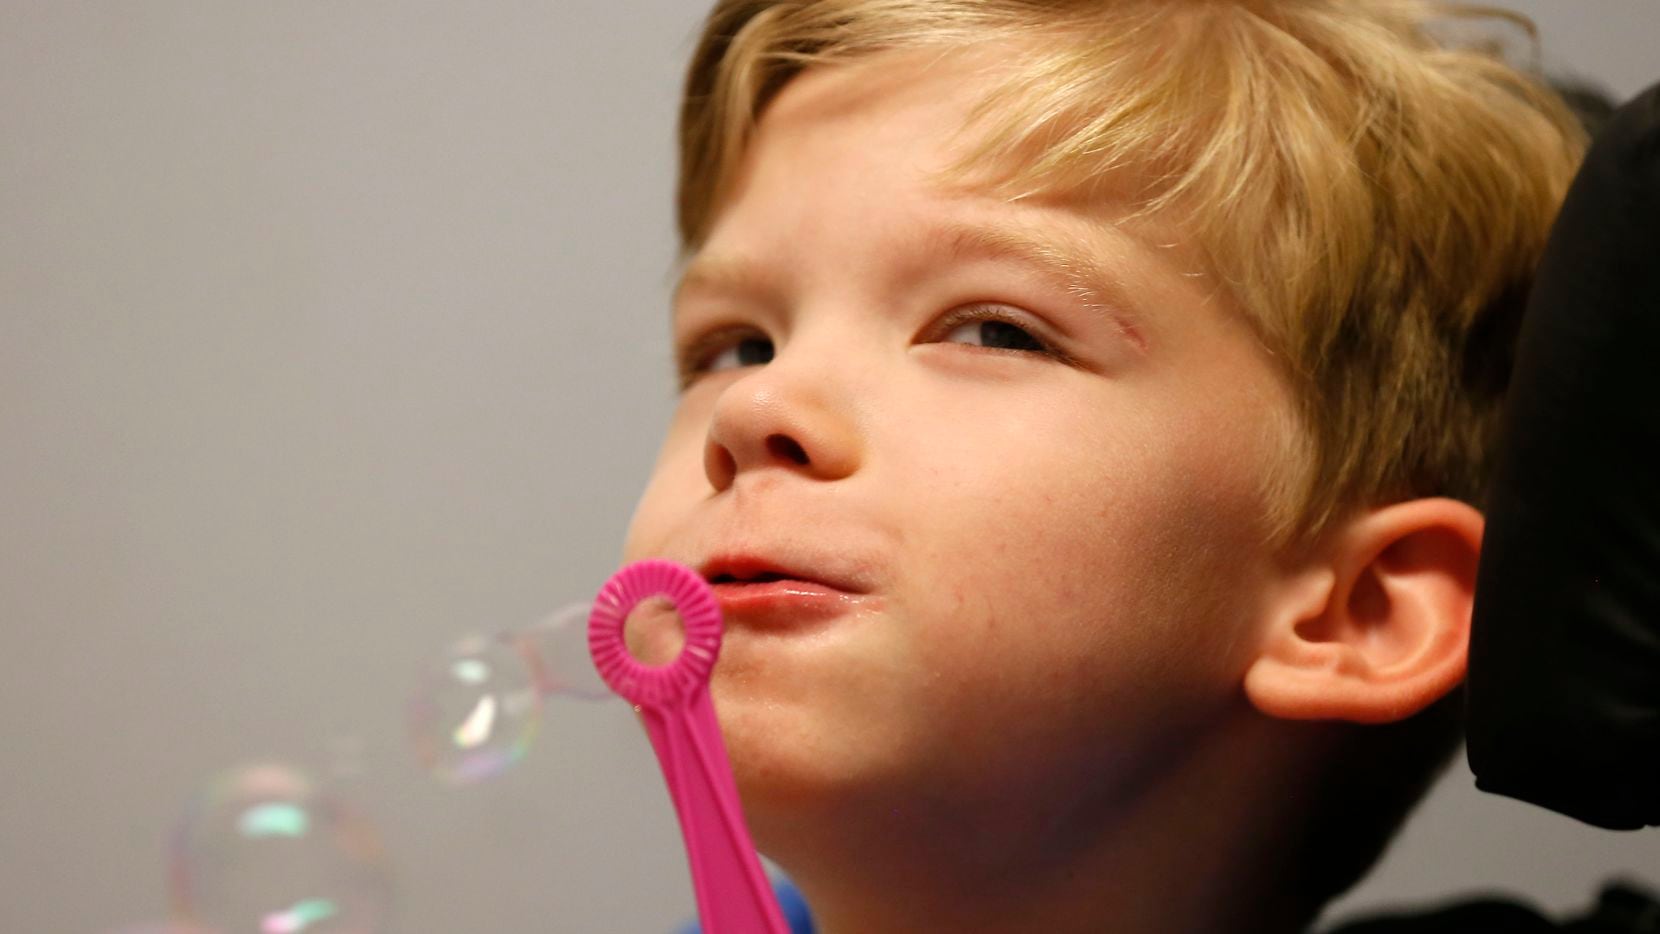 Will blows bubbles at Keystone Pediatric Therapy in McKinney, Texas, Wednesday, June 20, 2018.